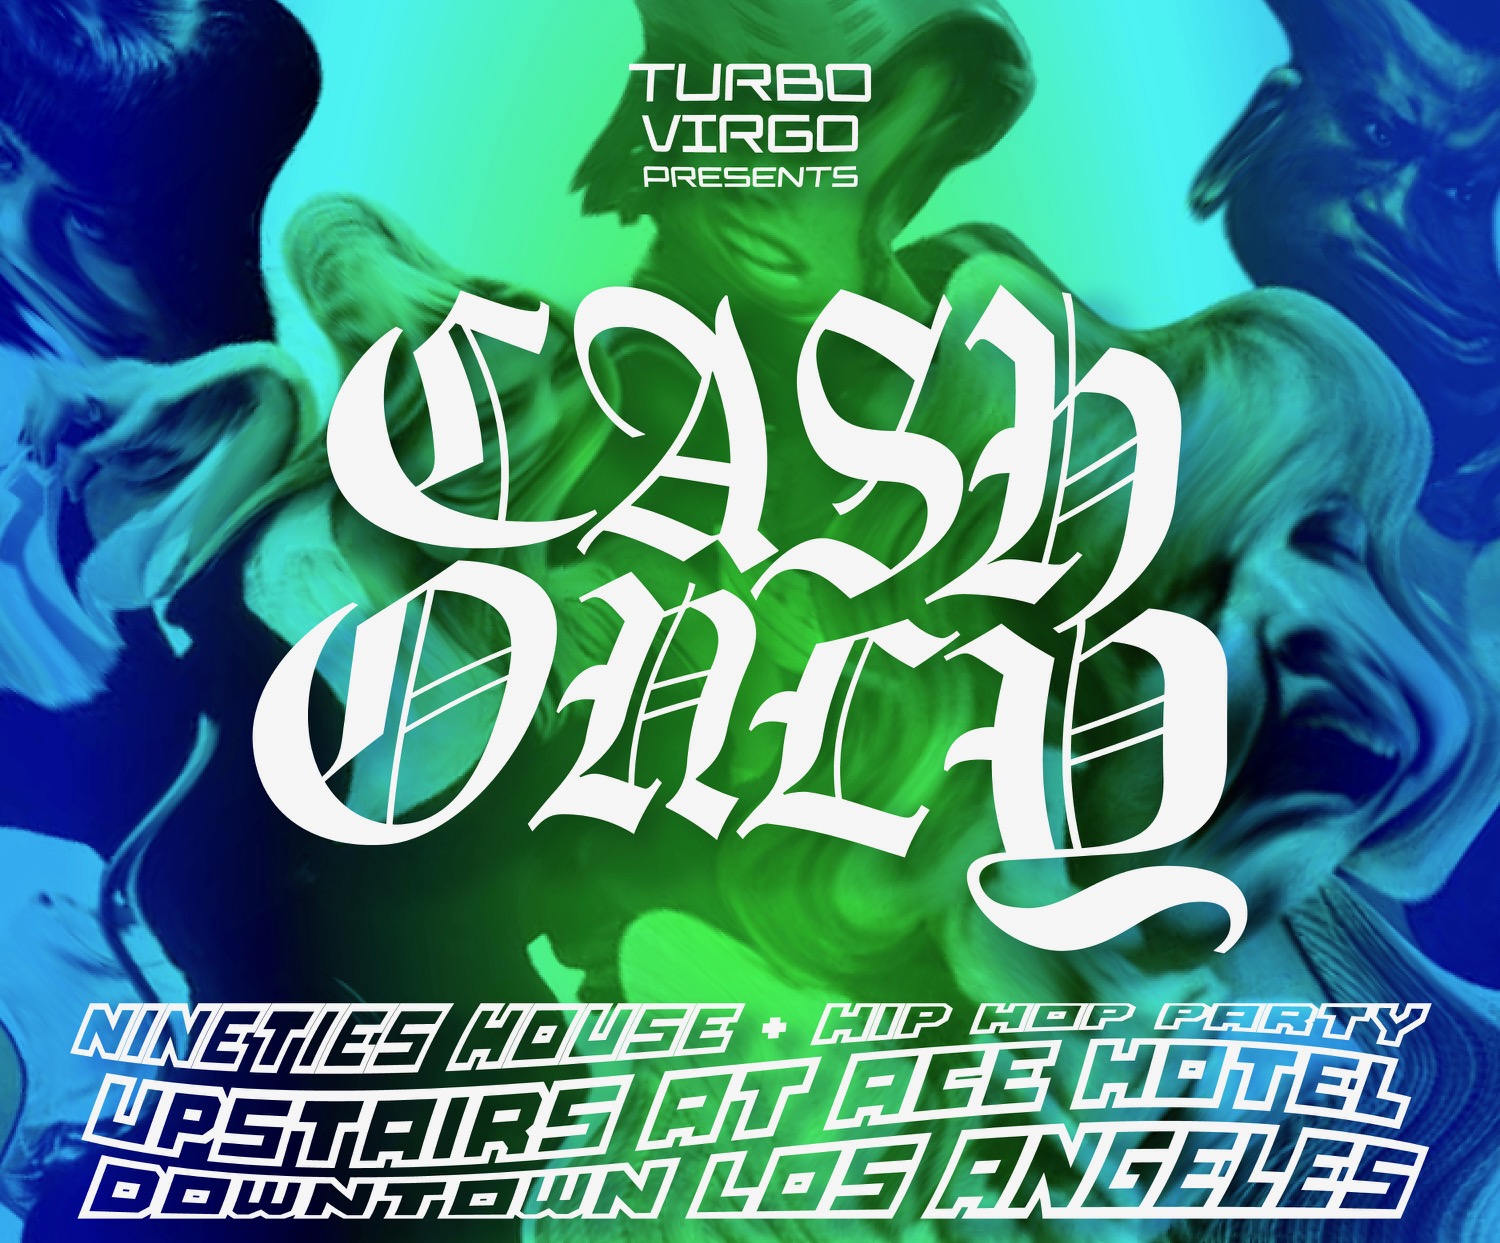 Cash Only event promo